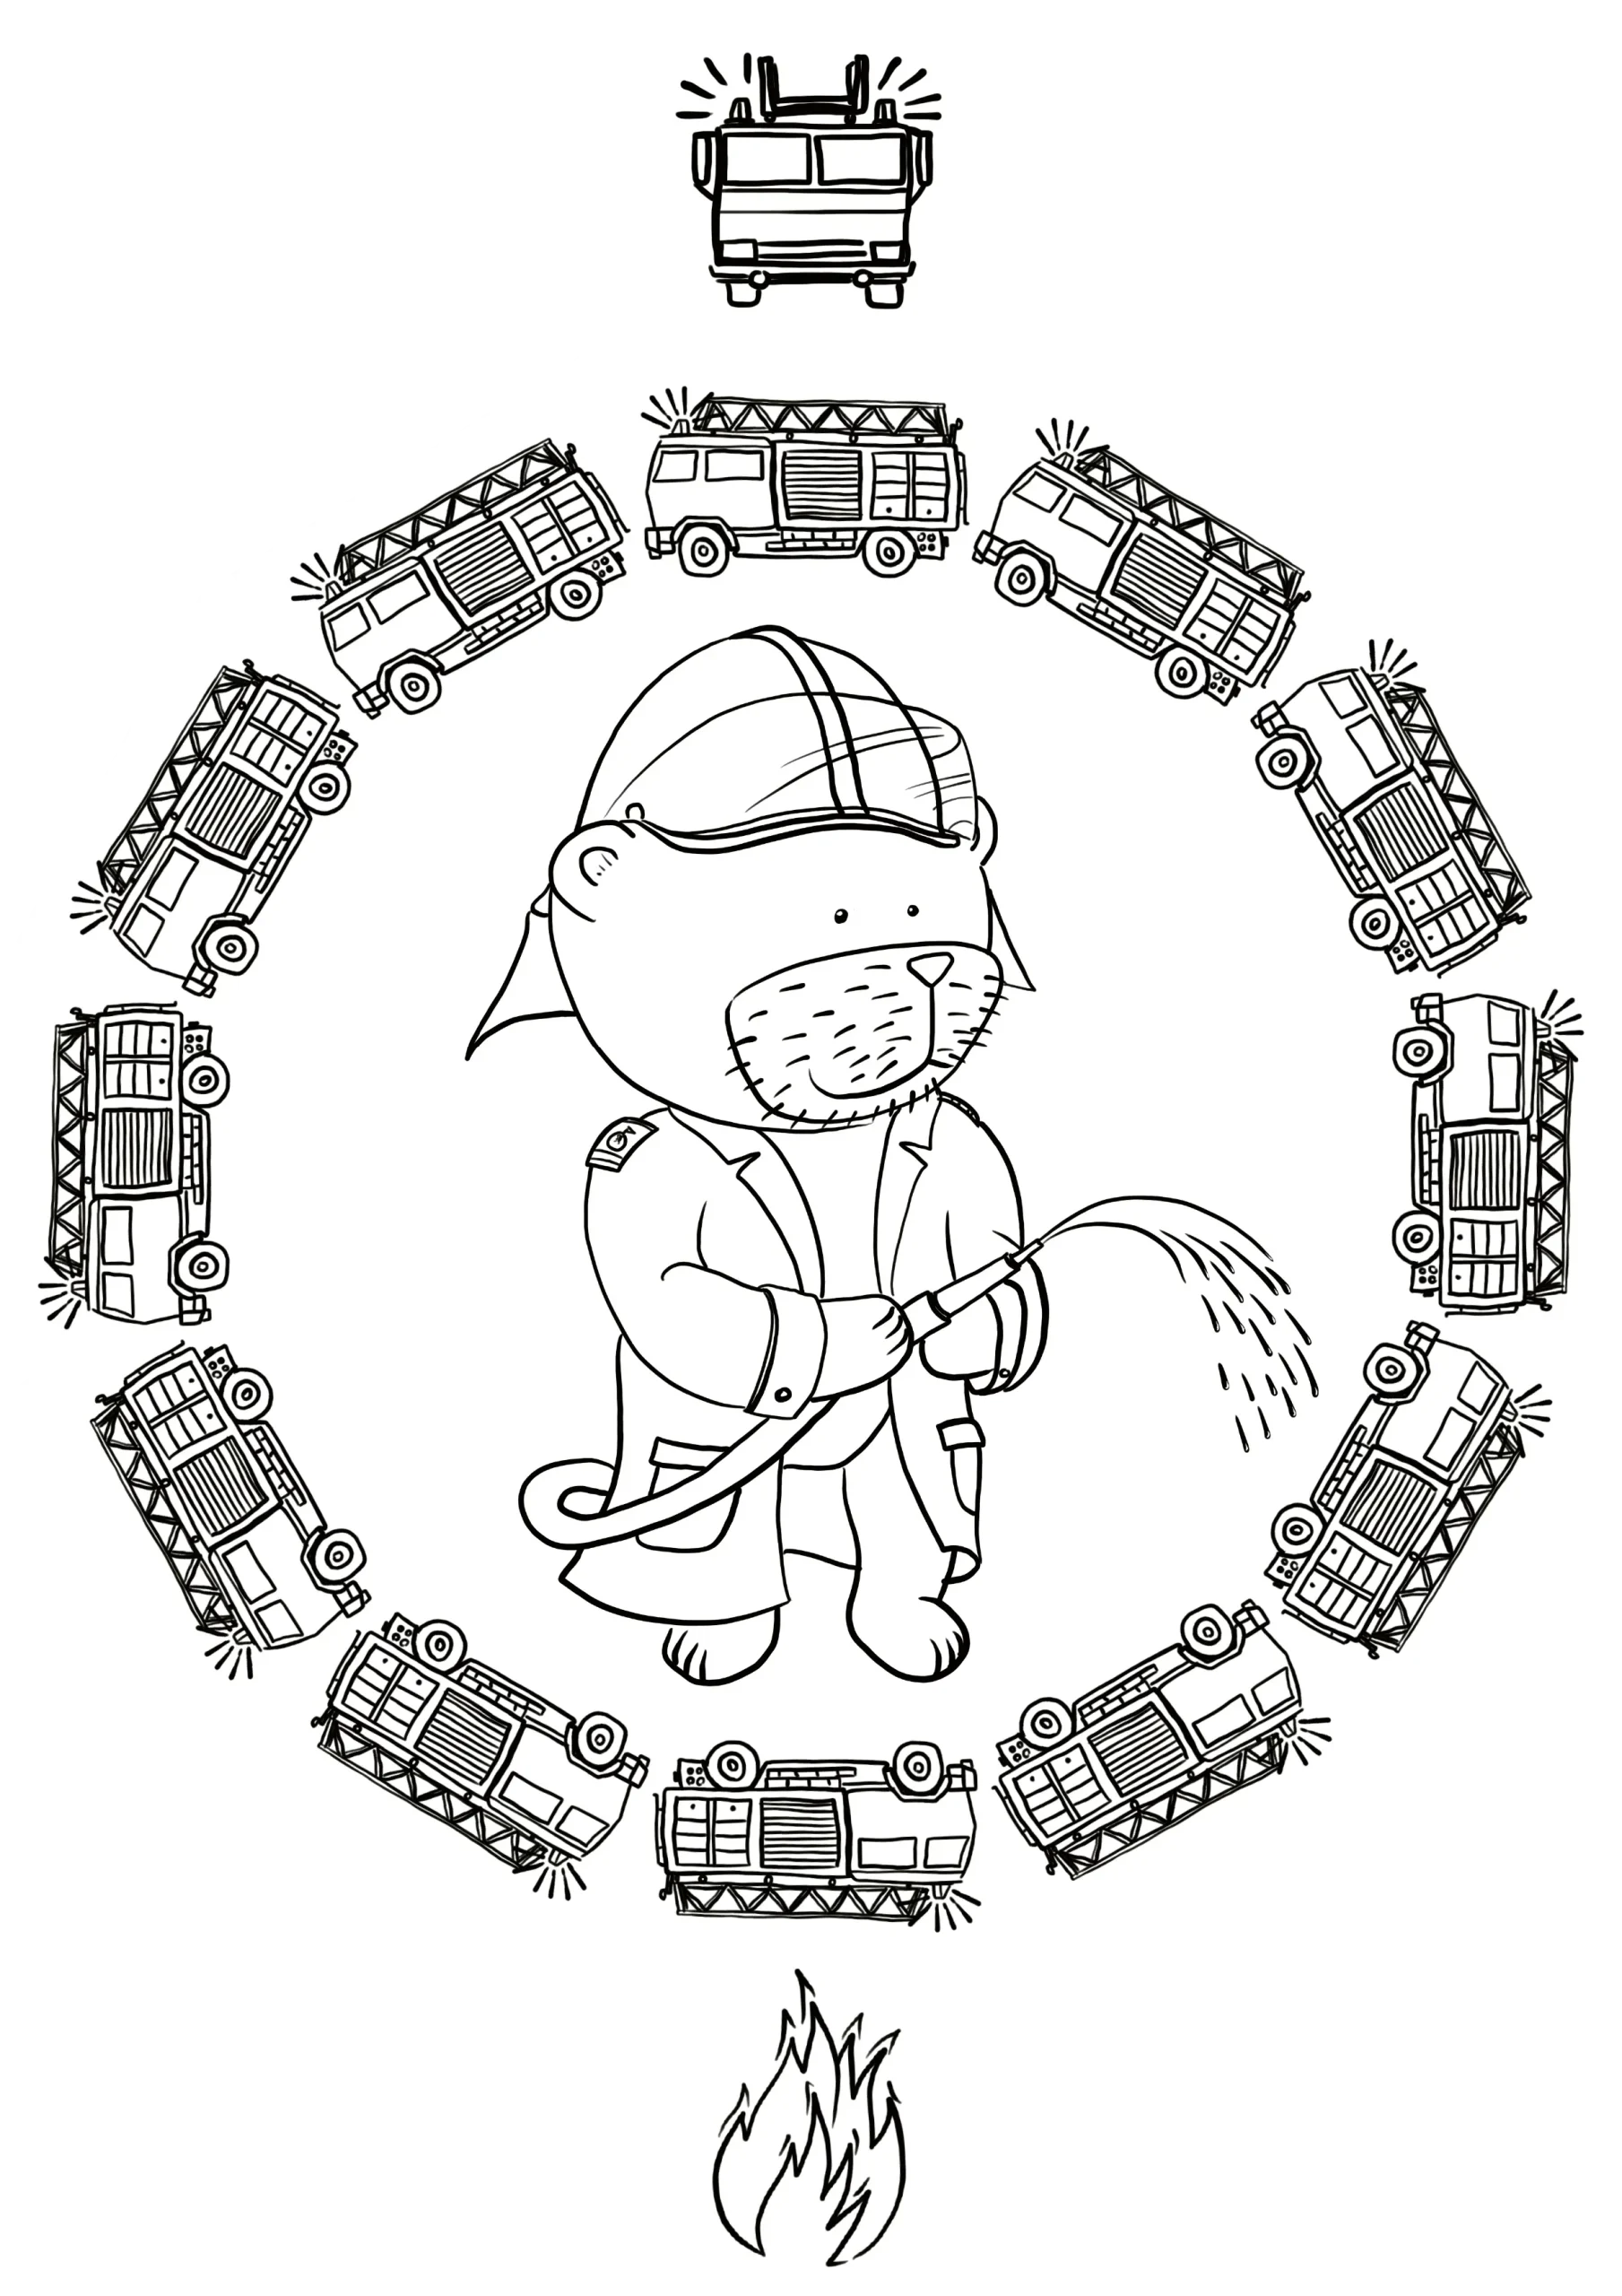 Coloring Page with Firefighter